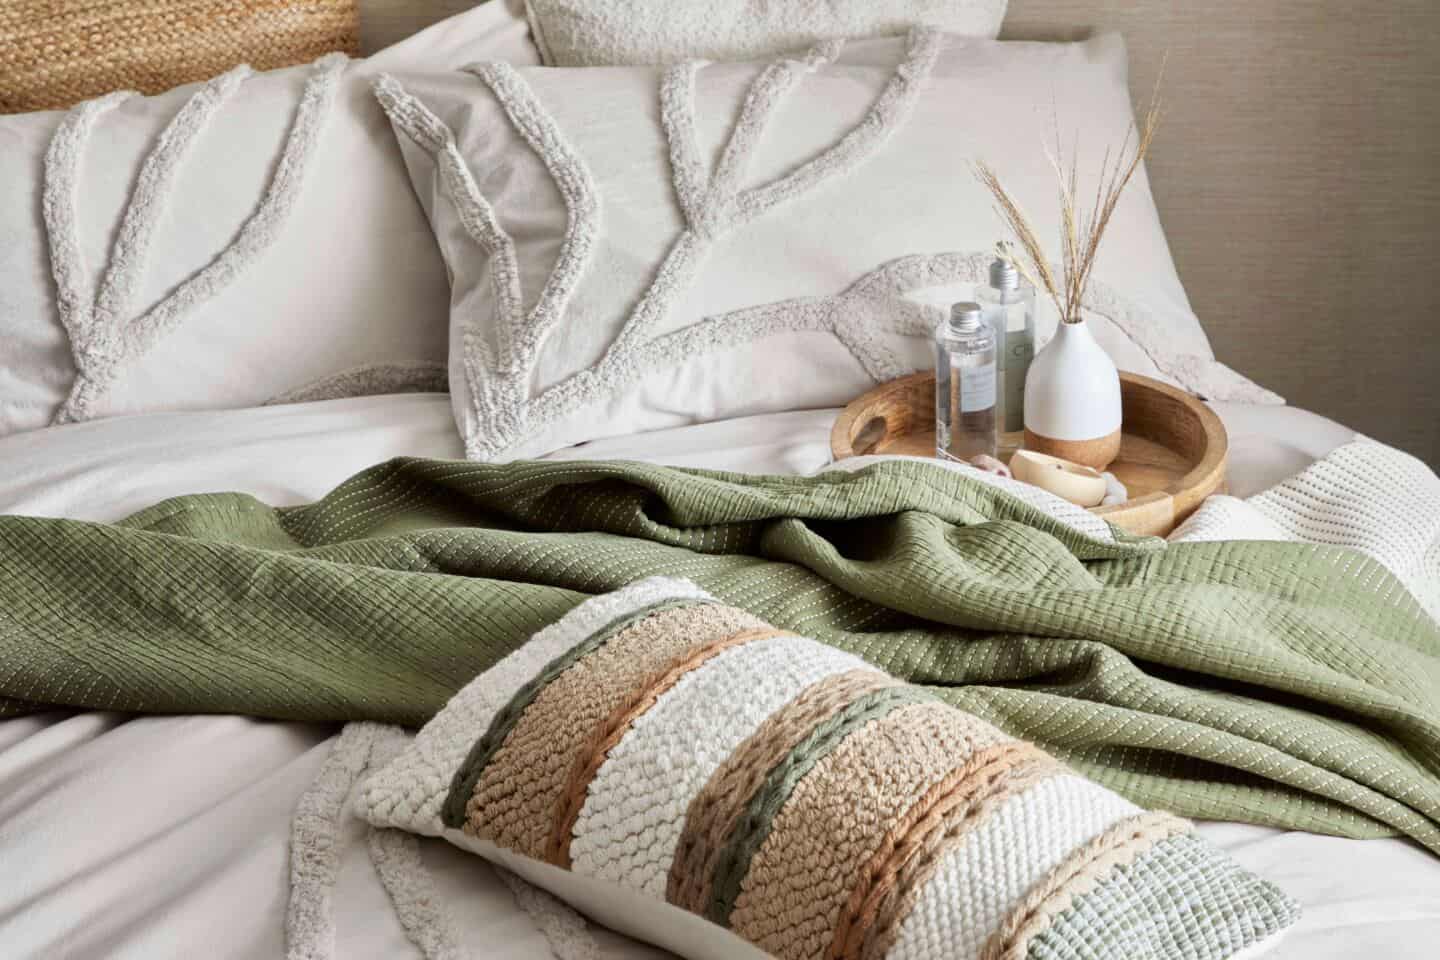 Interior Trends for 2022: Organic Minimalism. The Edited Life Collection from Dunelm. An unmade double bed covered in highly textured blankets and cushions